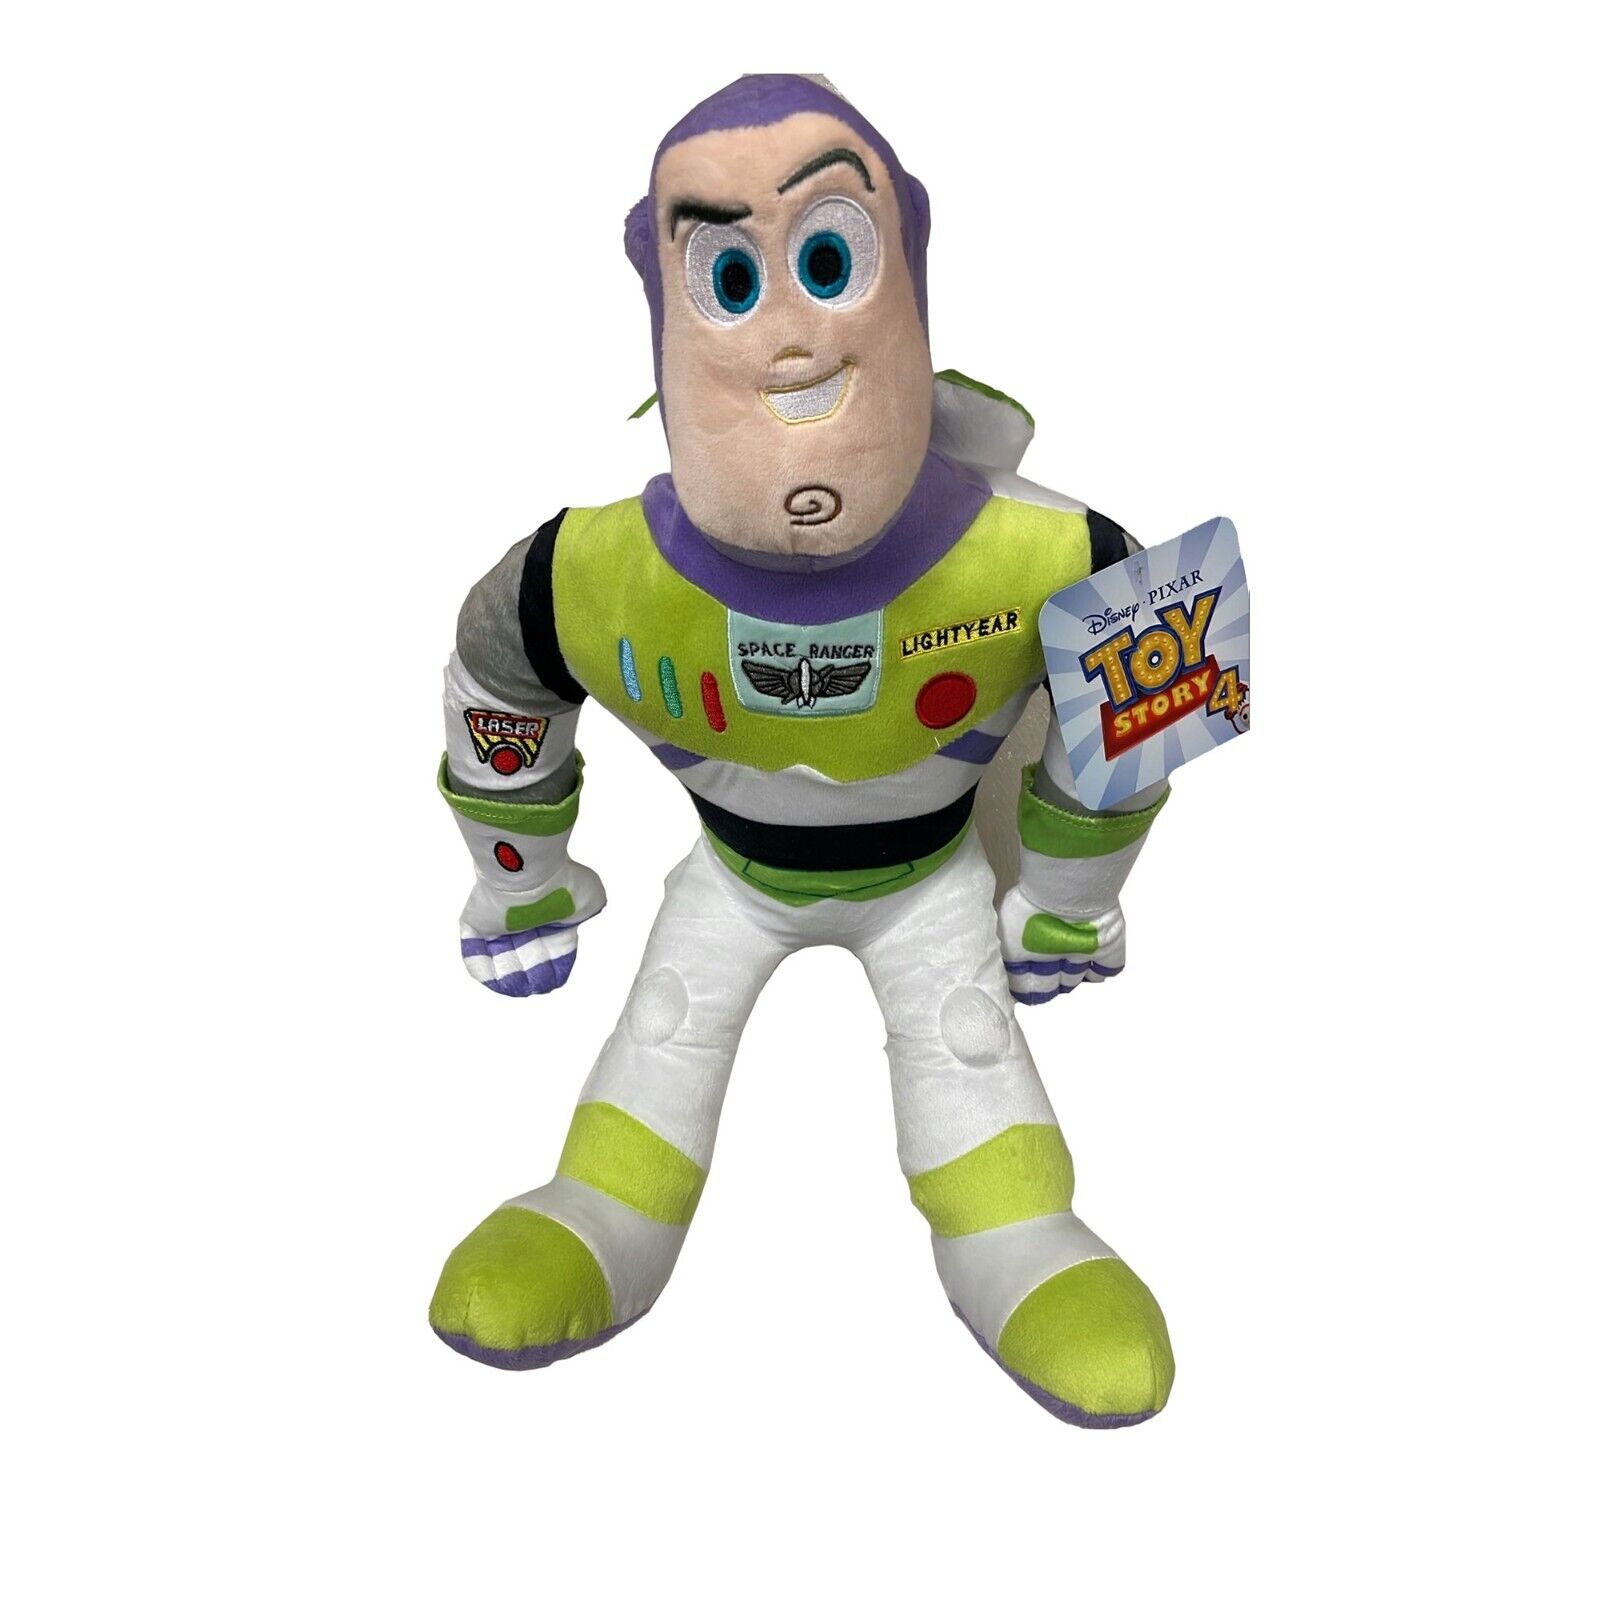 Embark on Galactic Adventures with Buzz Lightyear Plush Toy for Kids